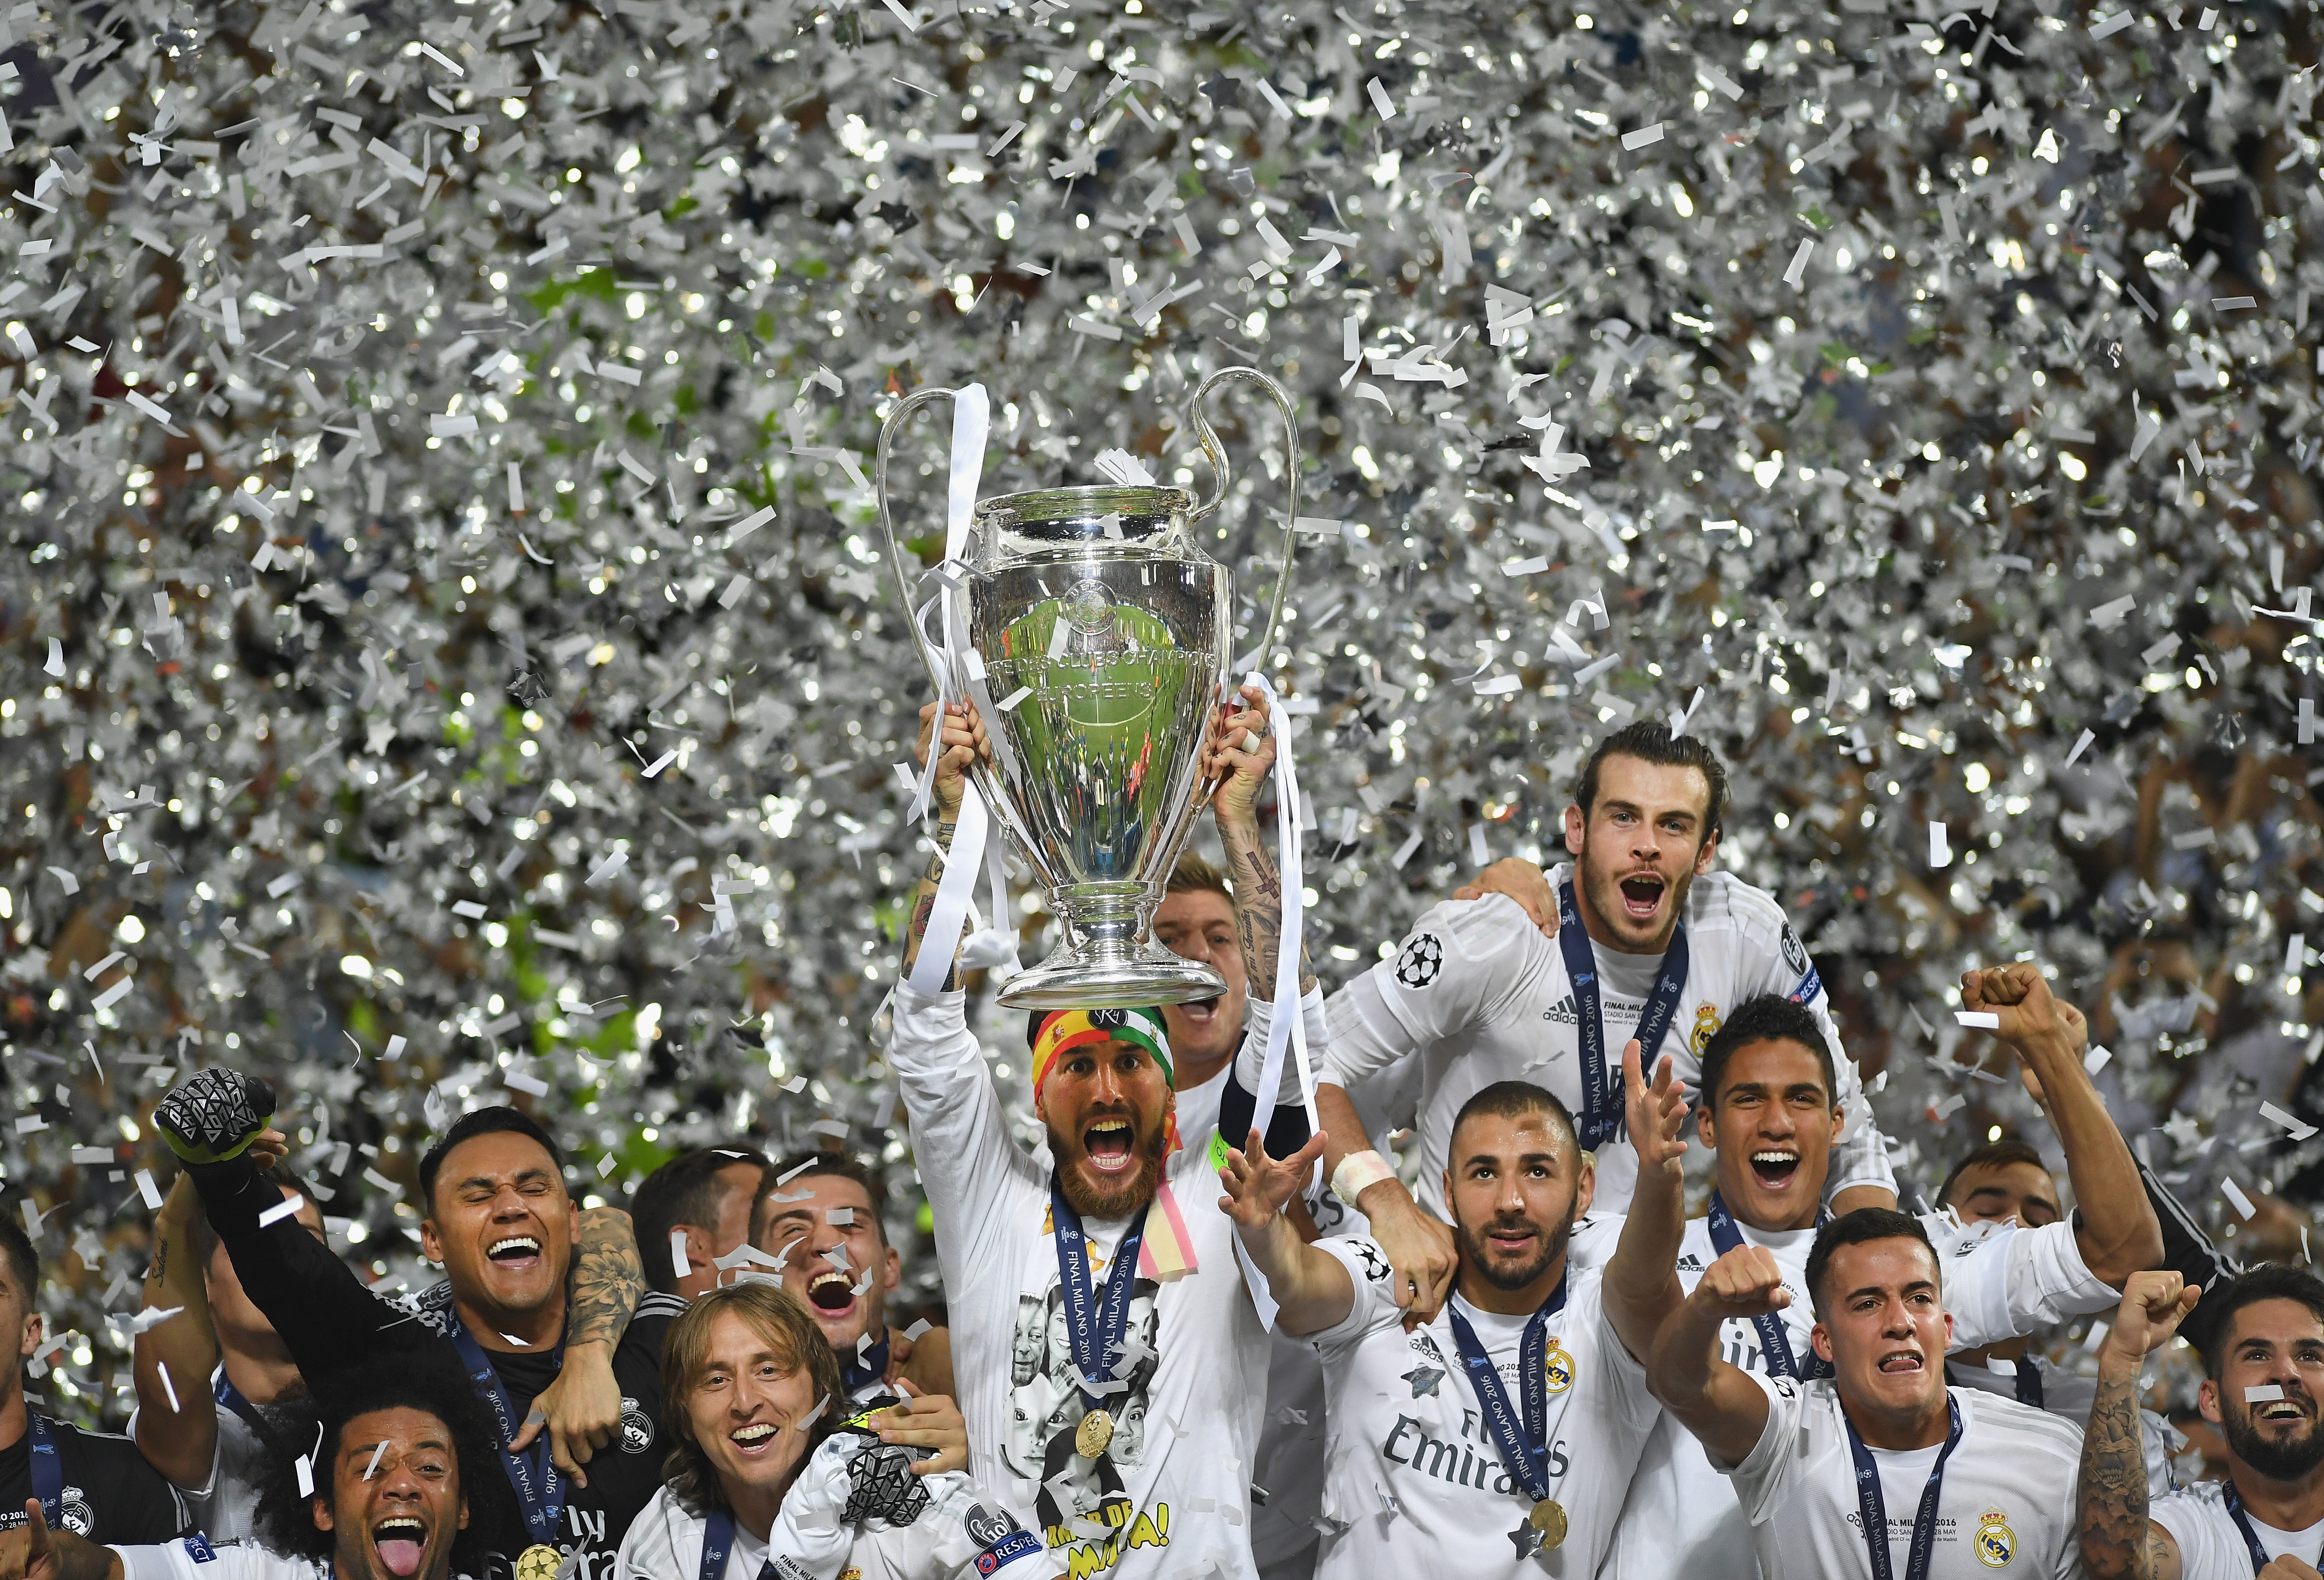 MILAN, ITALY - MAY 28: Sergio Ramos of Real Madrid lifts the Champions League trophy after victory in the UEFA Champions League Final match between Real Madrid and Club Atletico de Madrid at Stadio Giuseppe Meazza on May 28, 2016 in Milan, Italy.